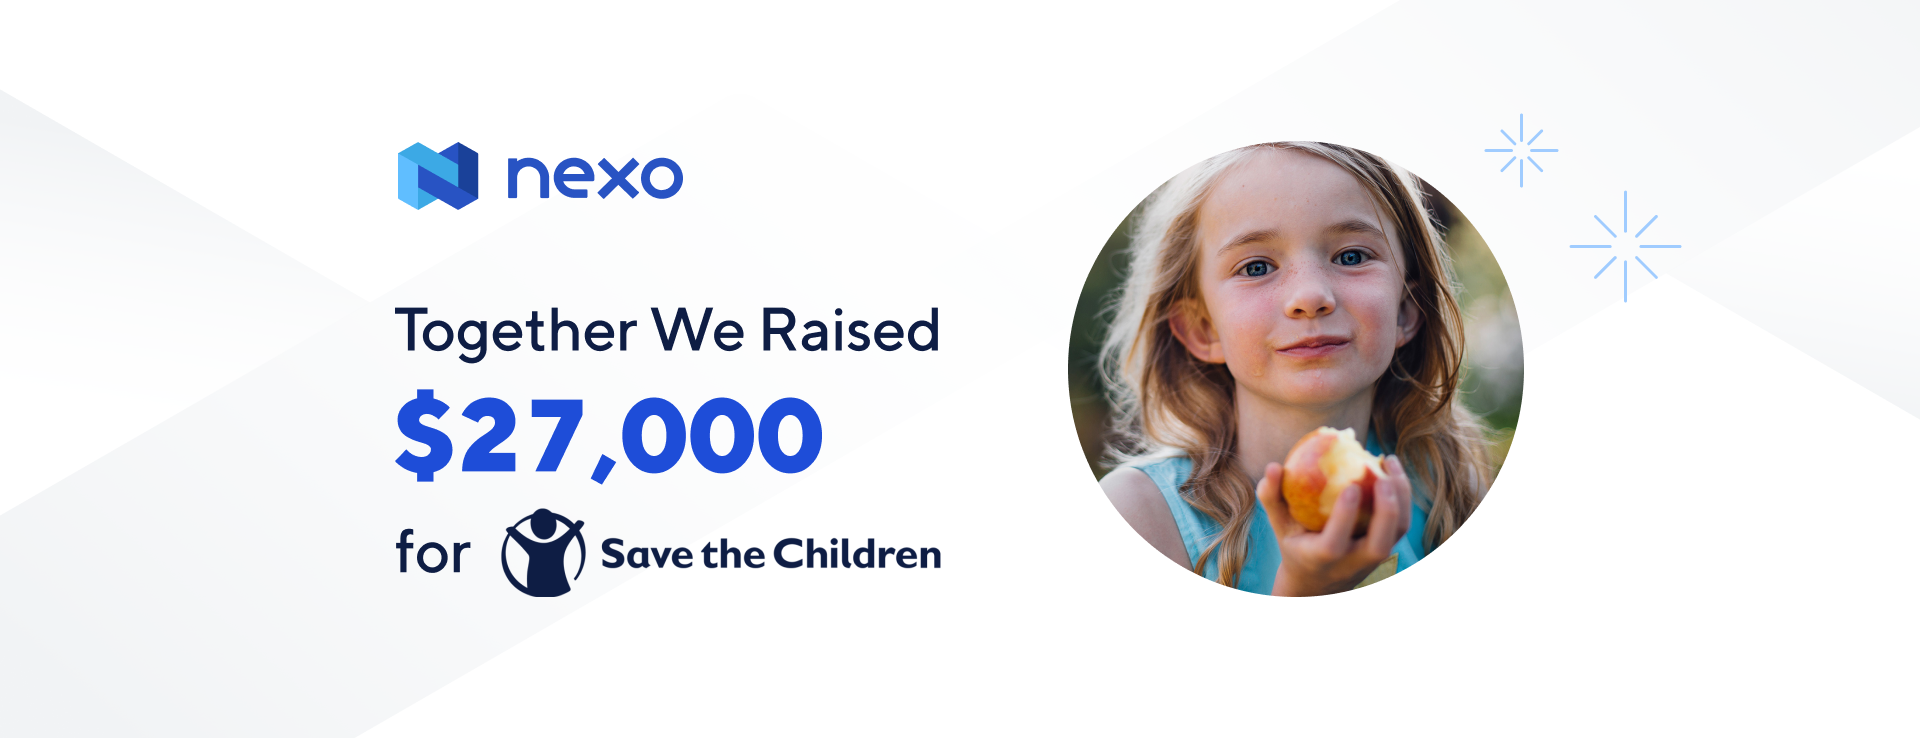 Nexo and Its Community Raise $27,000 for Save the Children